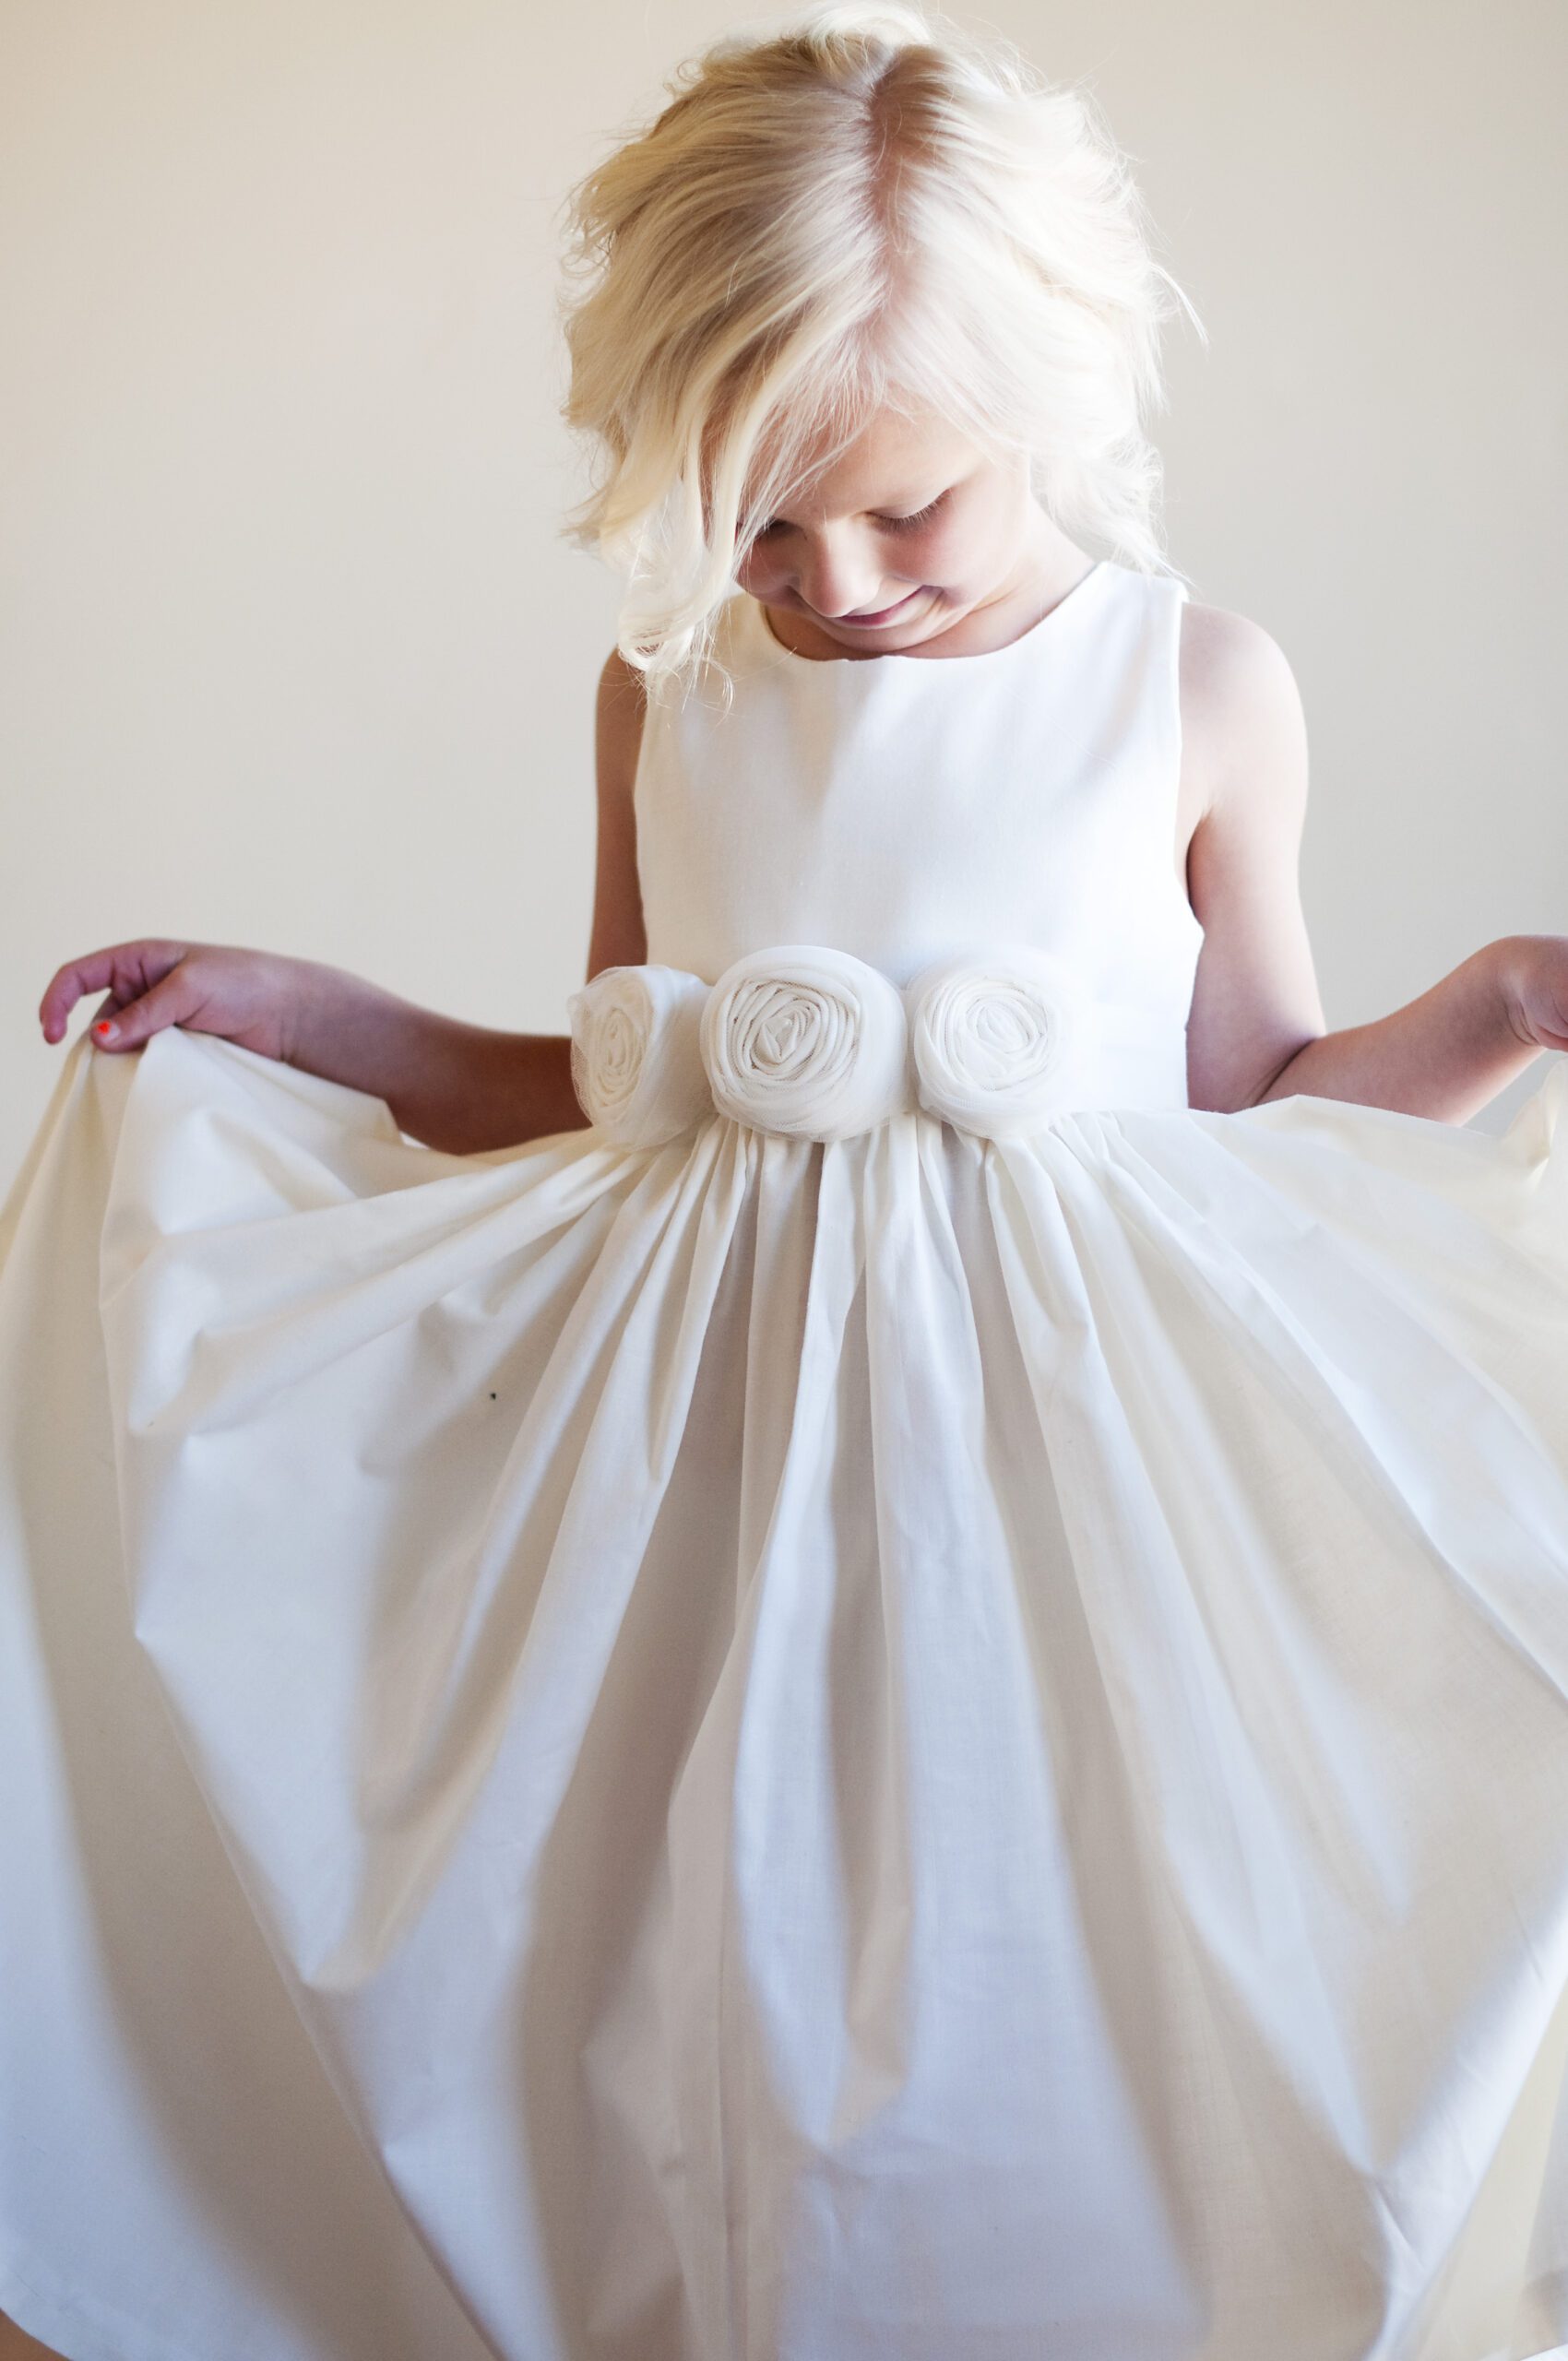 A young flower girl wearing a cotton flower girl dress with three pretty roses on the sash